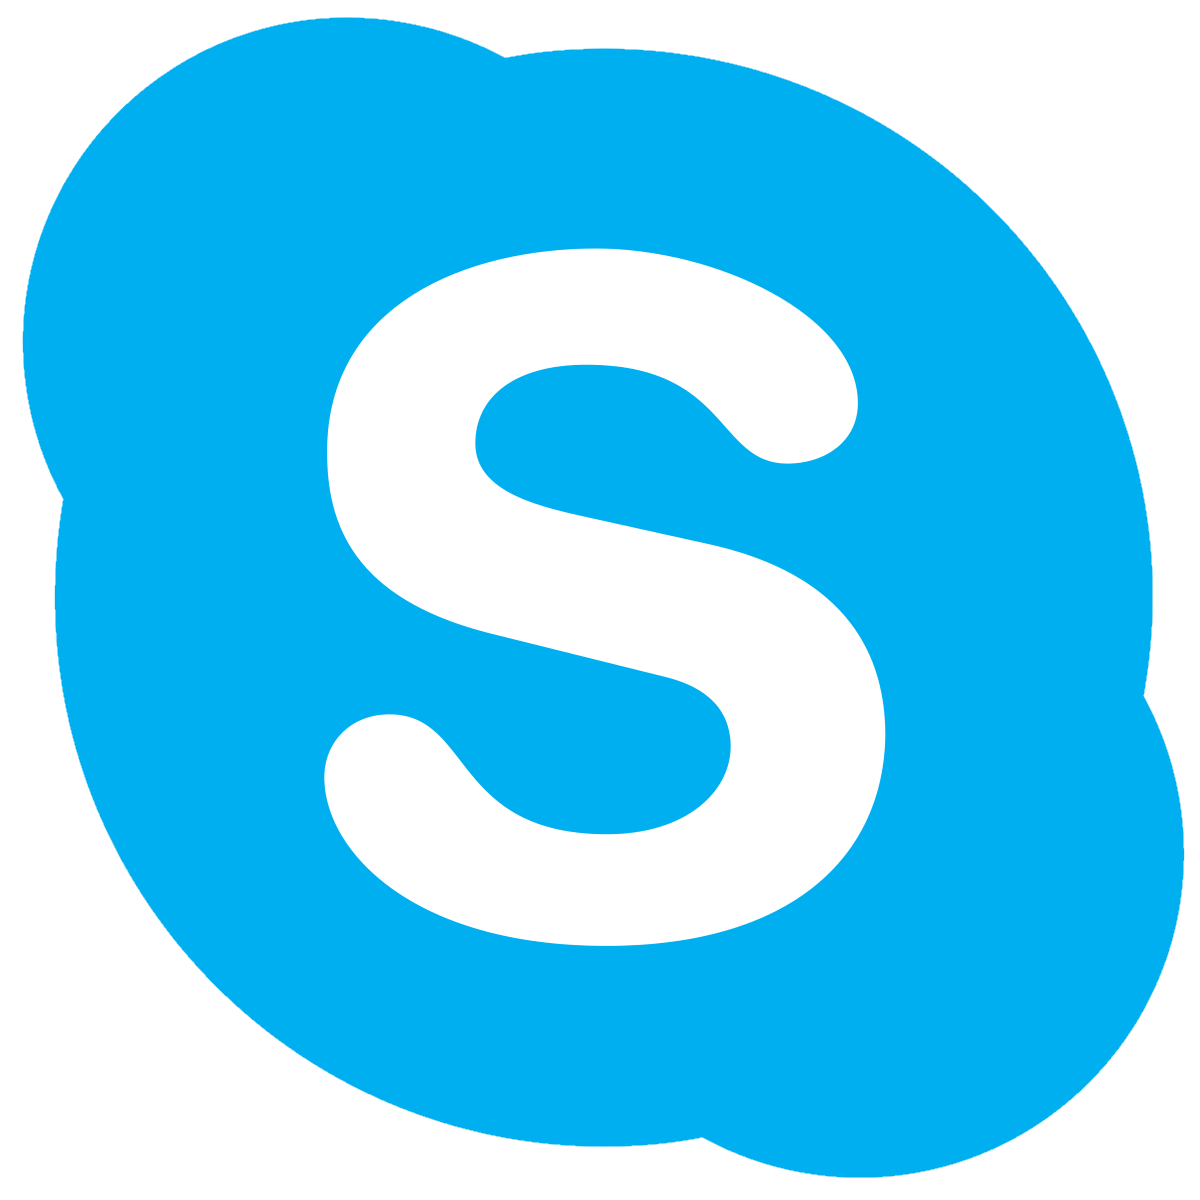 official skype download for windows 7